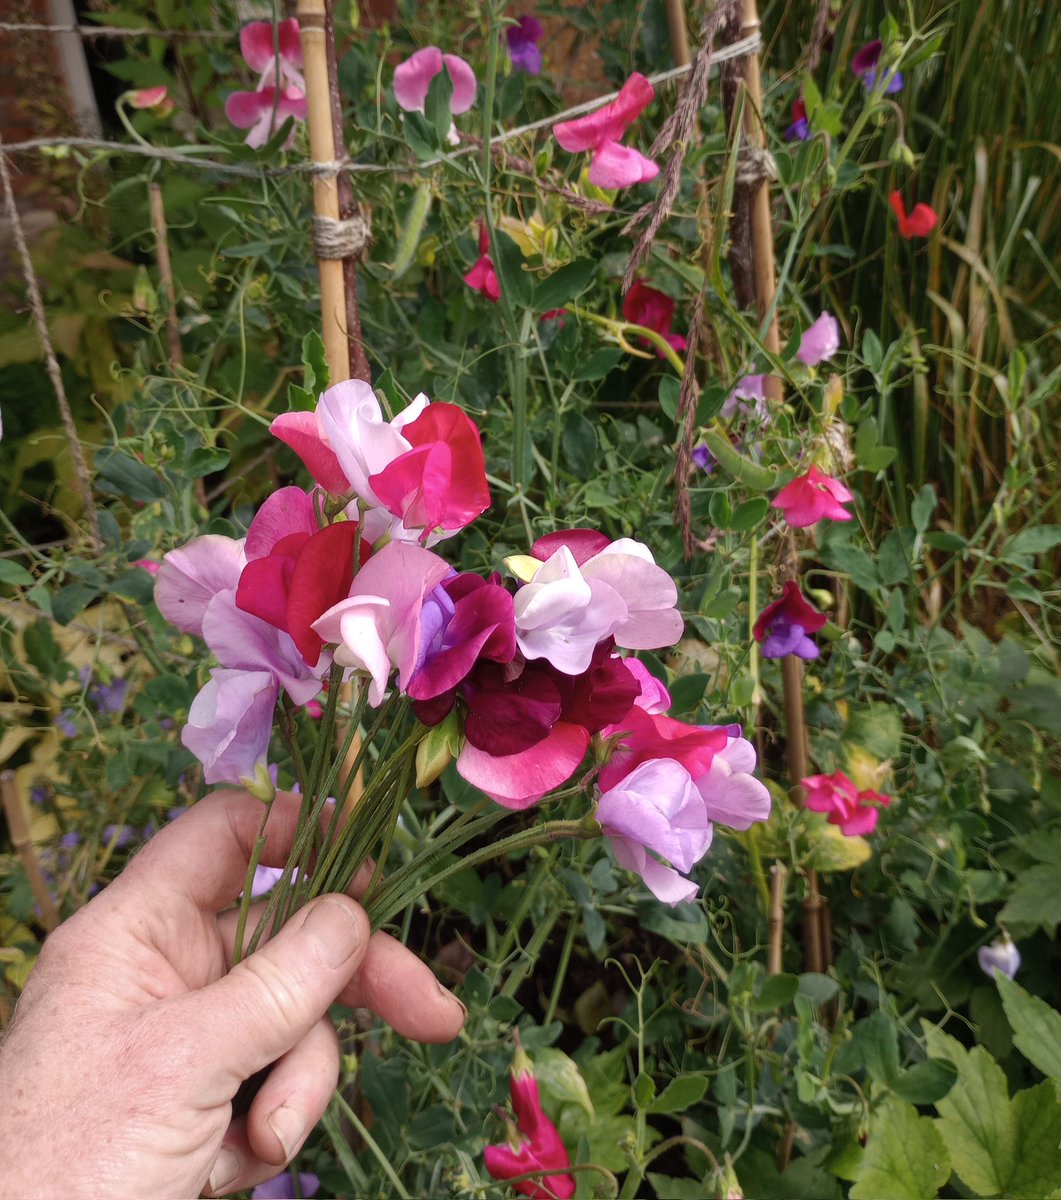 The sweet pea were slow to get going this year, but the colours and scent are still great. #mygarden #gardening #gardener